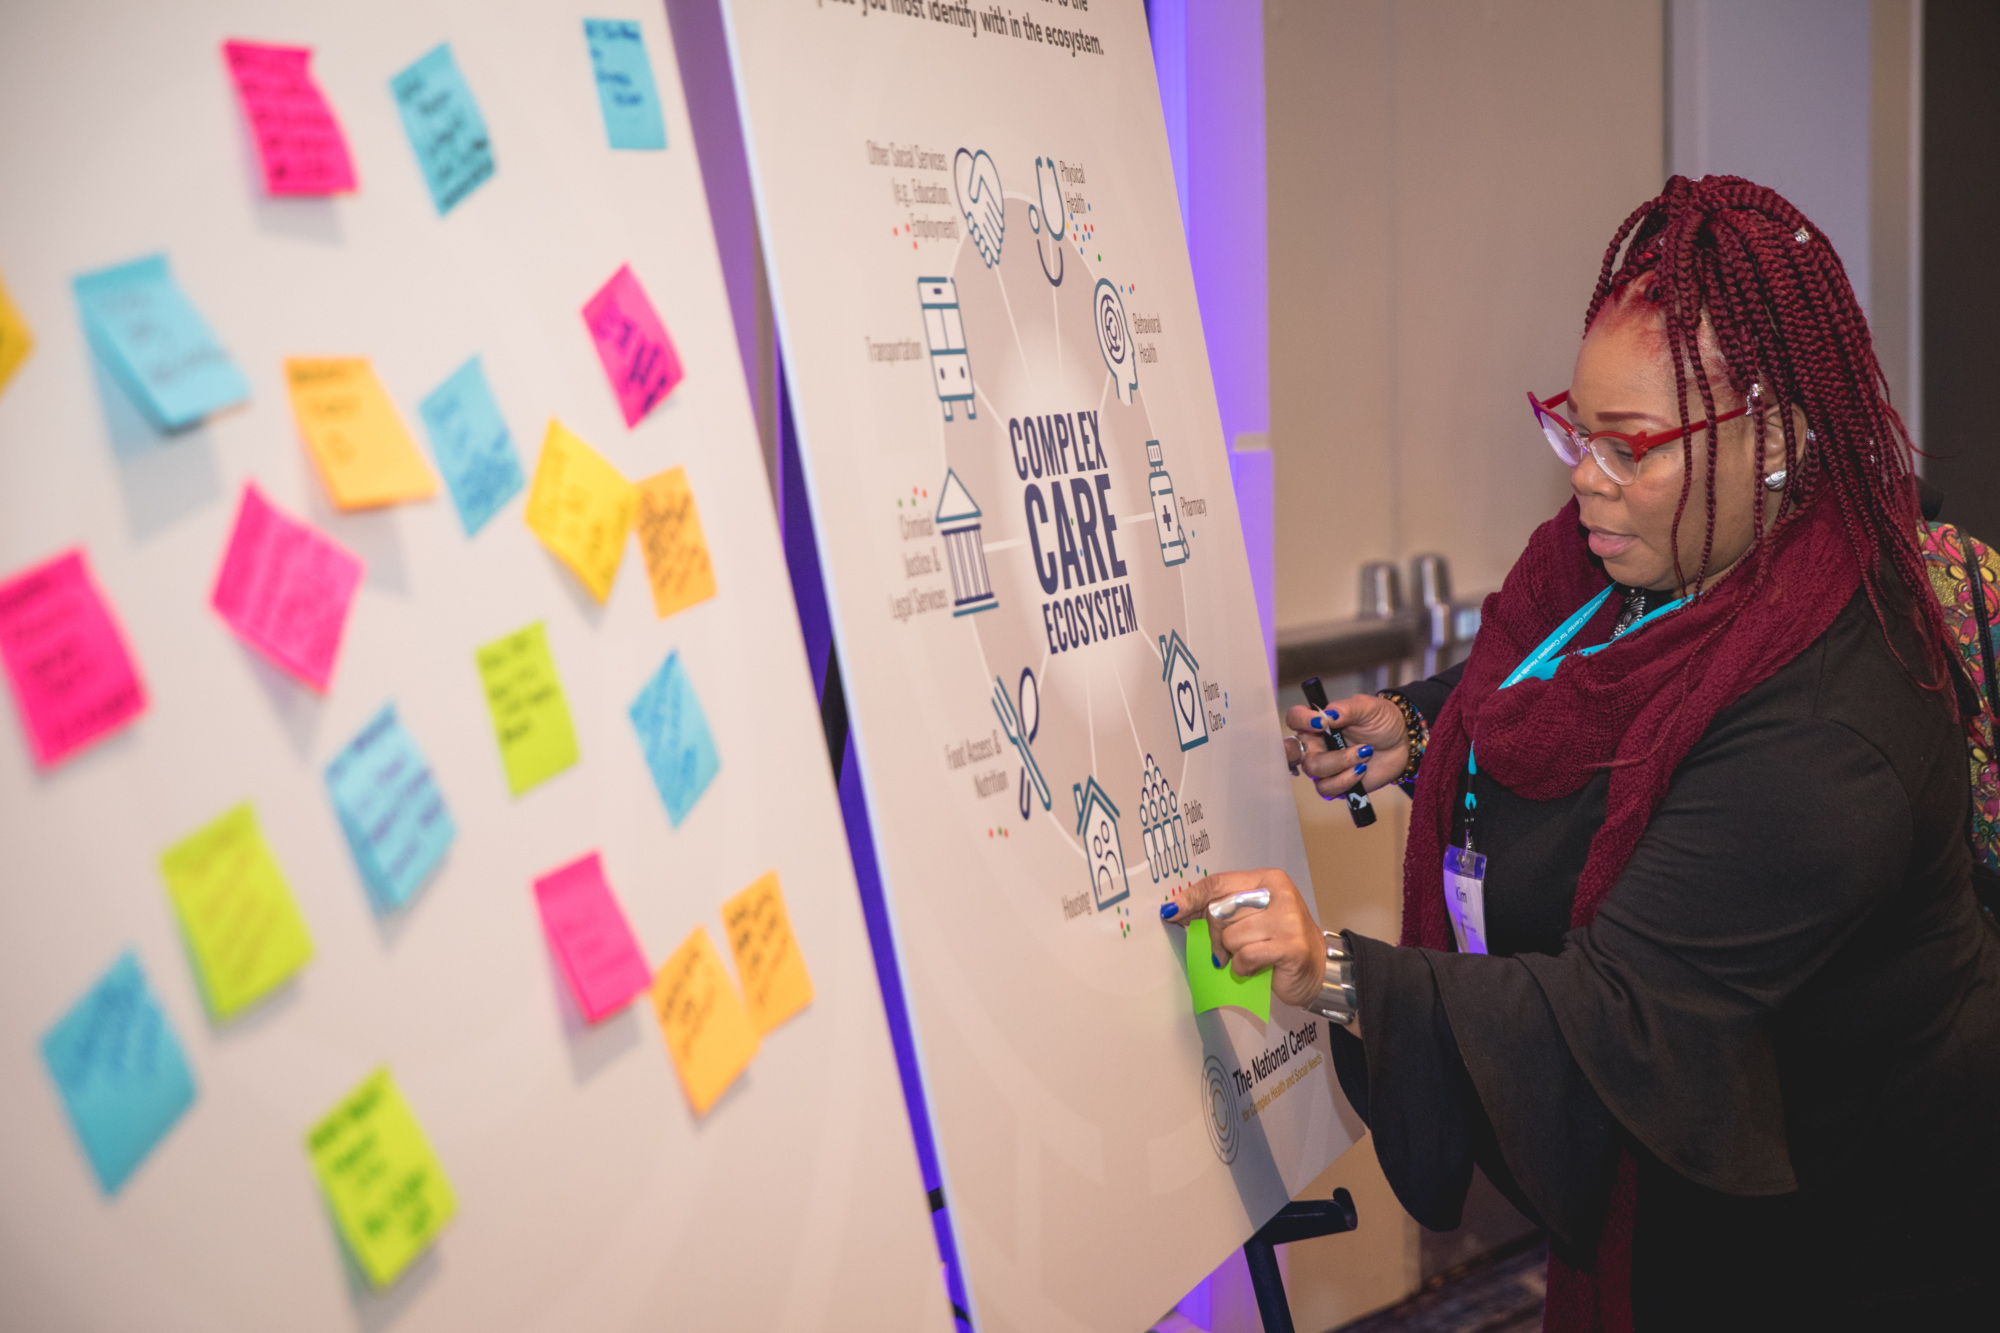 Adding post-it to poster labeled "complex care ecosystem"